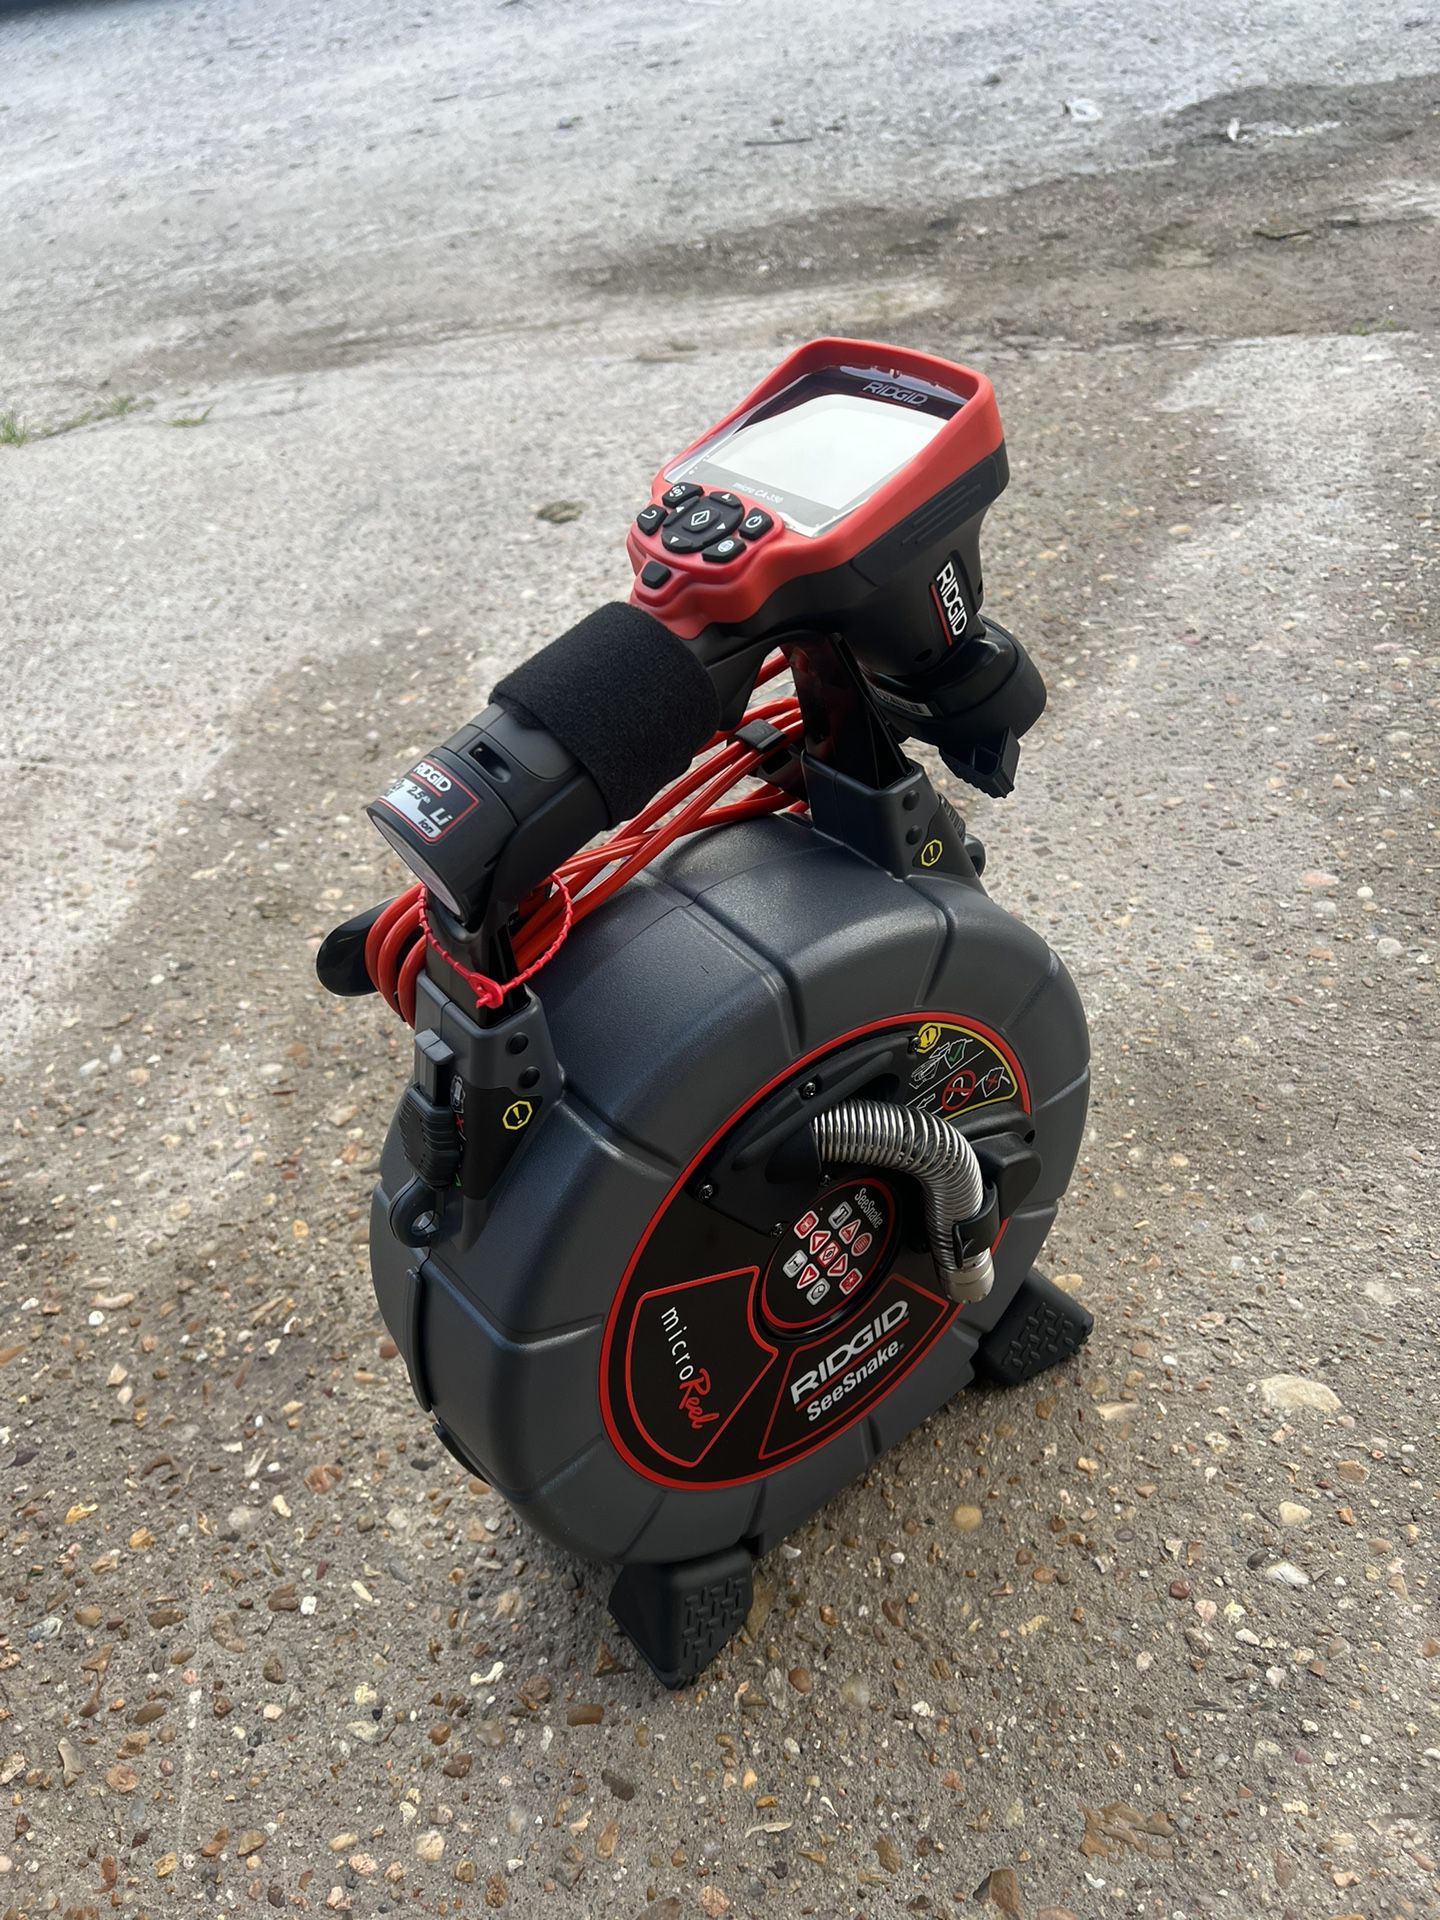 RIDGID SeeSnake MicroReel Drain Snake Video Inspection System with CA-350  Inspection Camera for Lines up to 100 ft. for Sale in Houston, TX - OfferUp